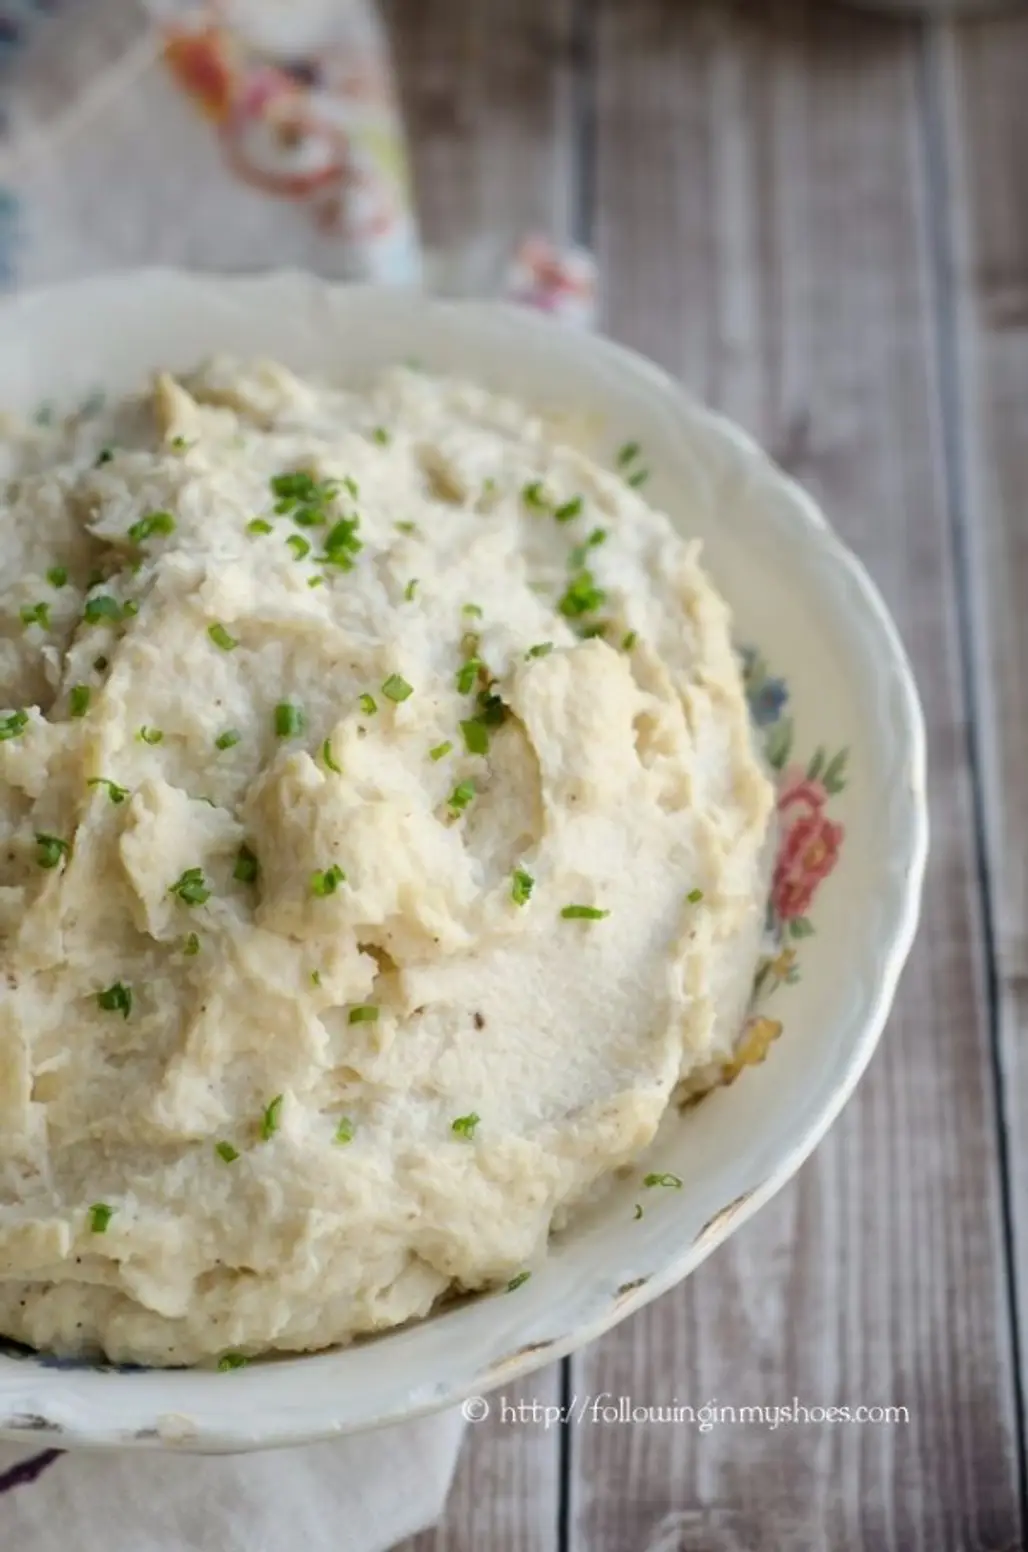 Slow Cooker Parsnip and Cauliflower Puree with Roasted Garlic